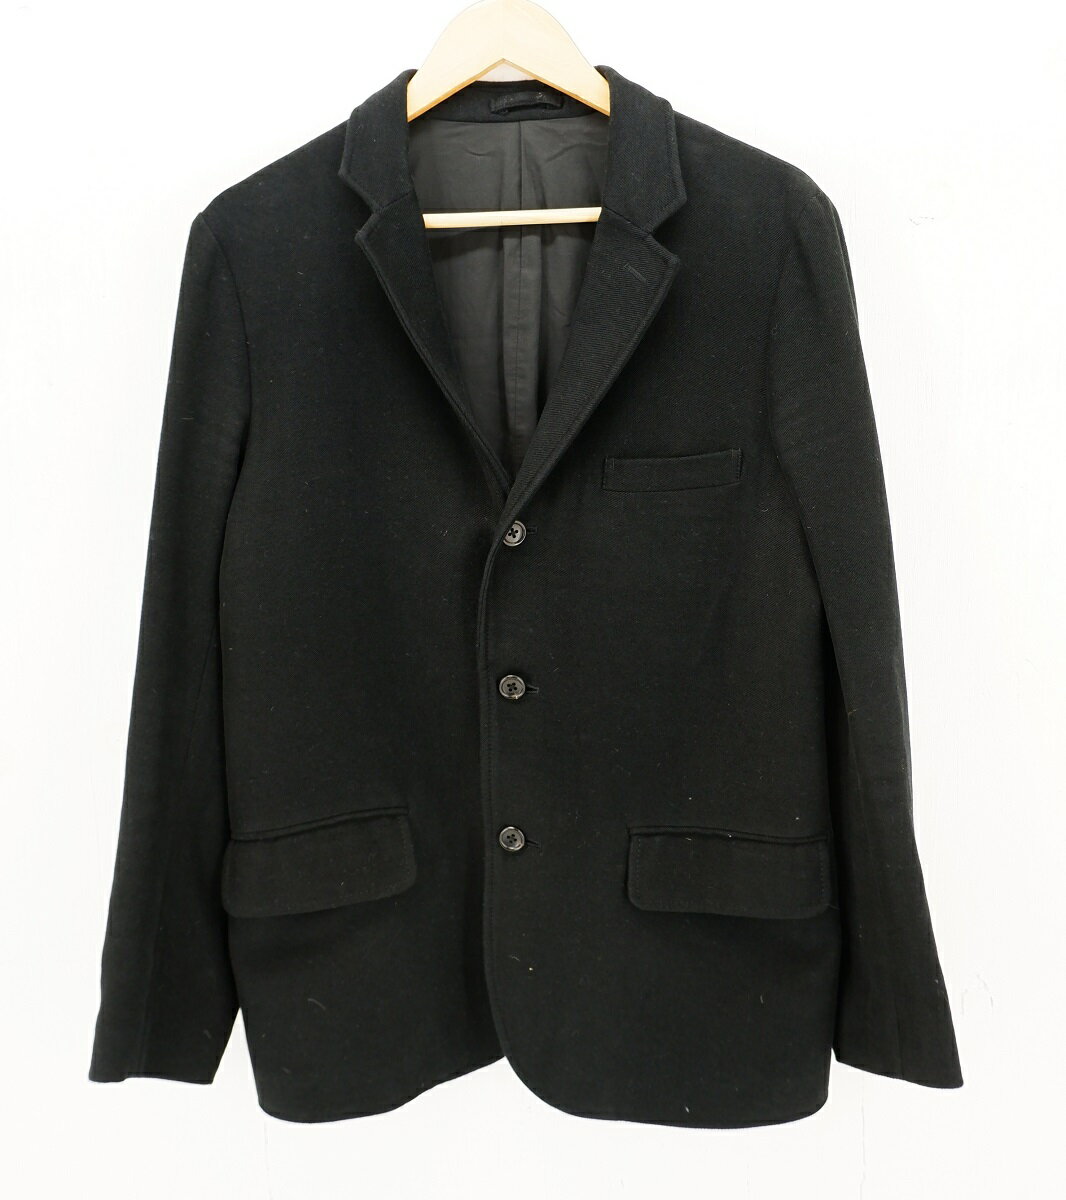 UNIVERSAL PRODUCTS TAILORED JACKET size：M ユニバーサルプロダクツ テーラードジャケット ブラック 123-60401 Made in Japan